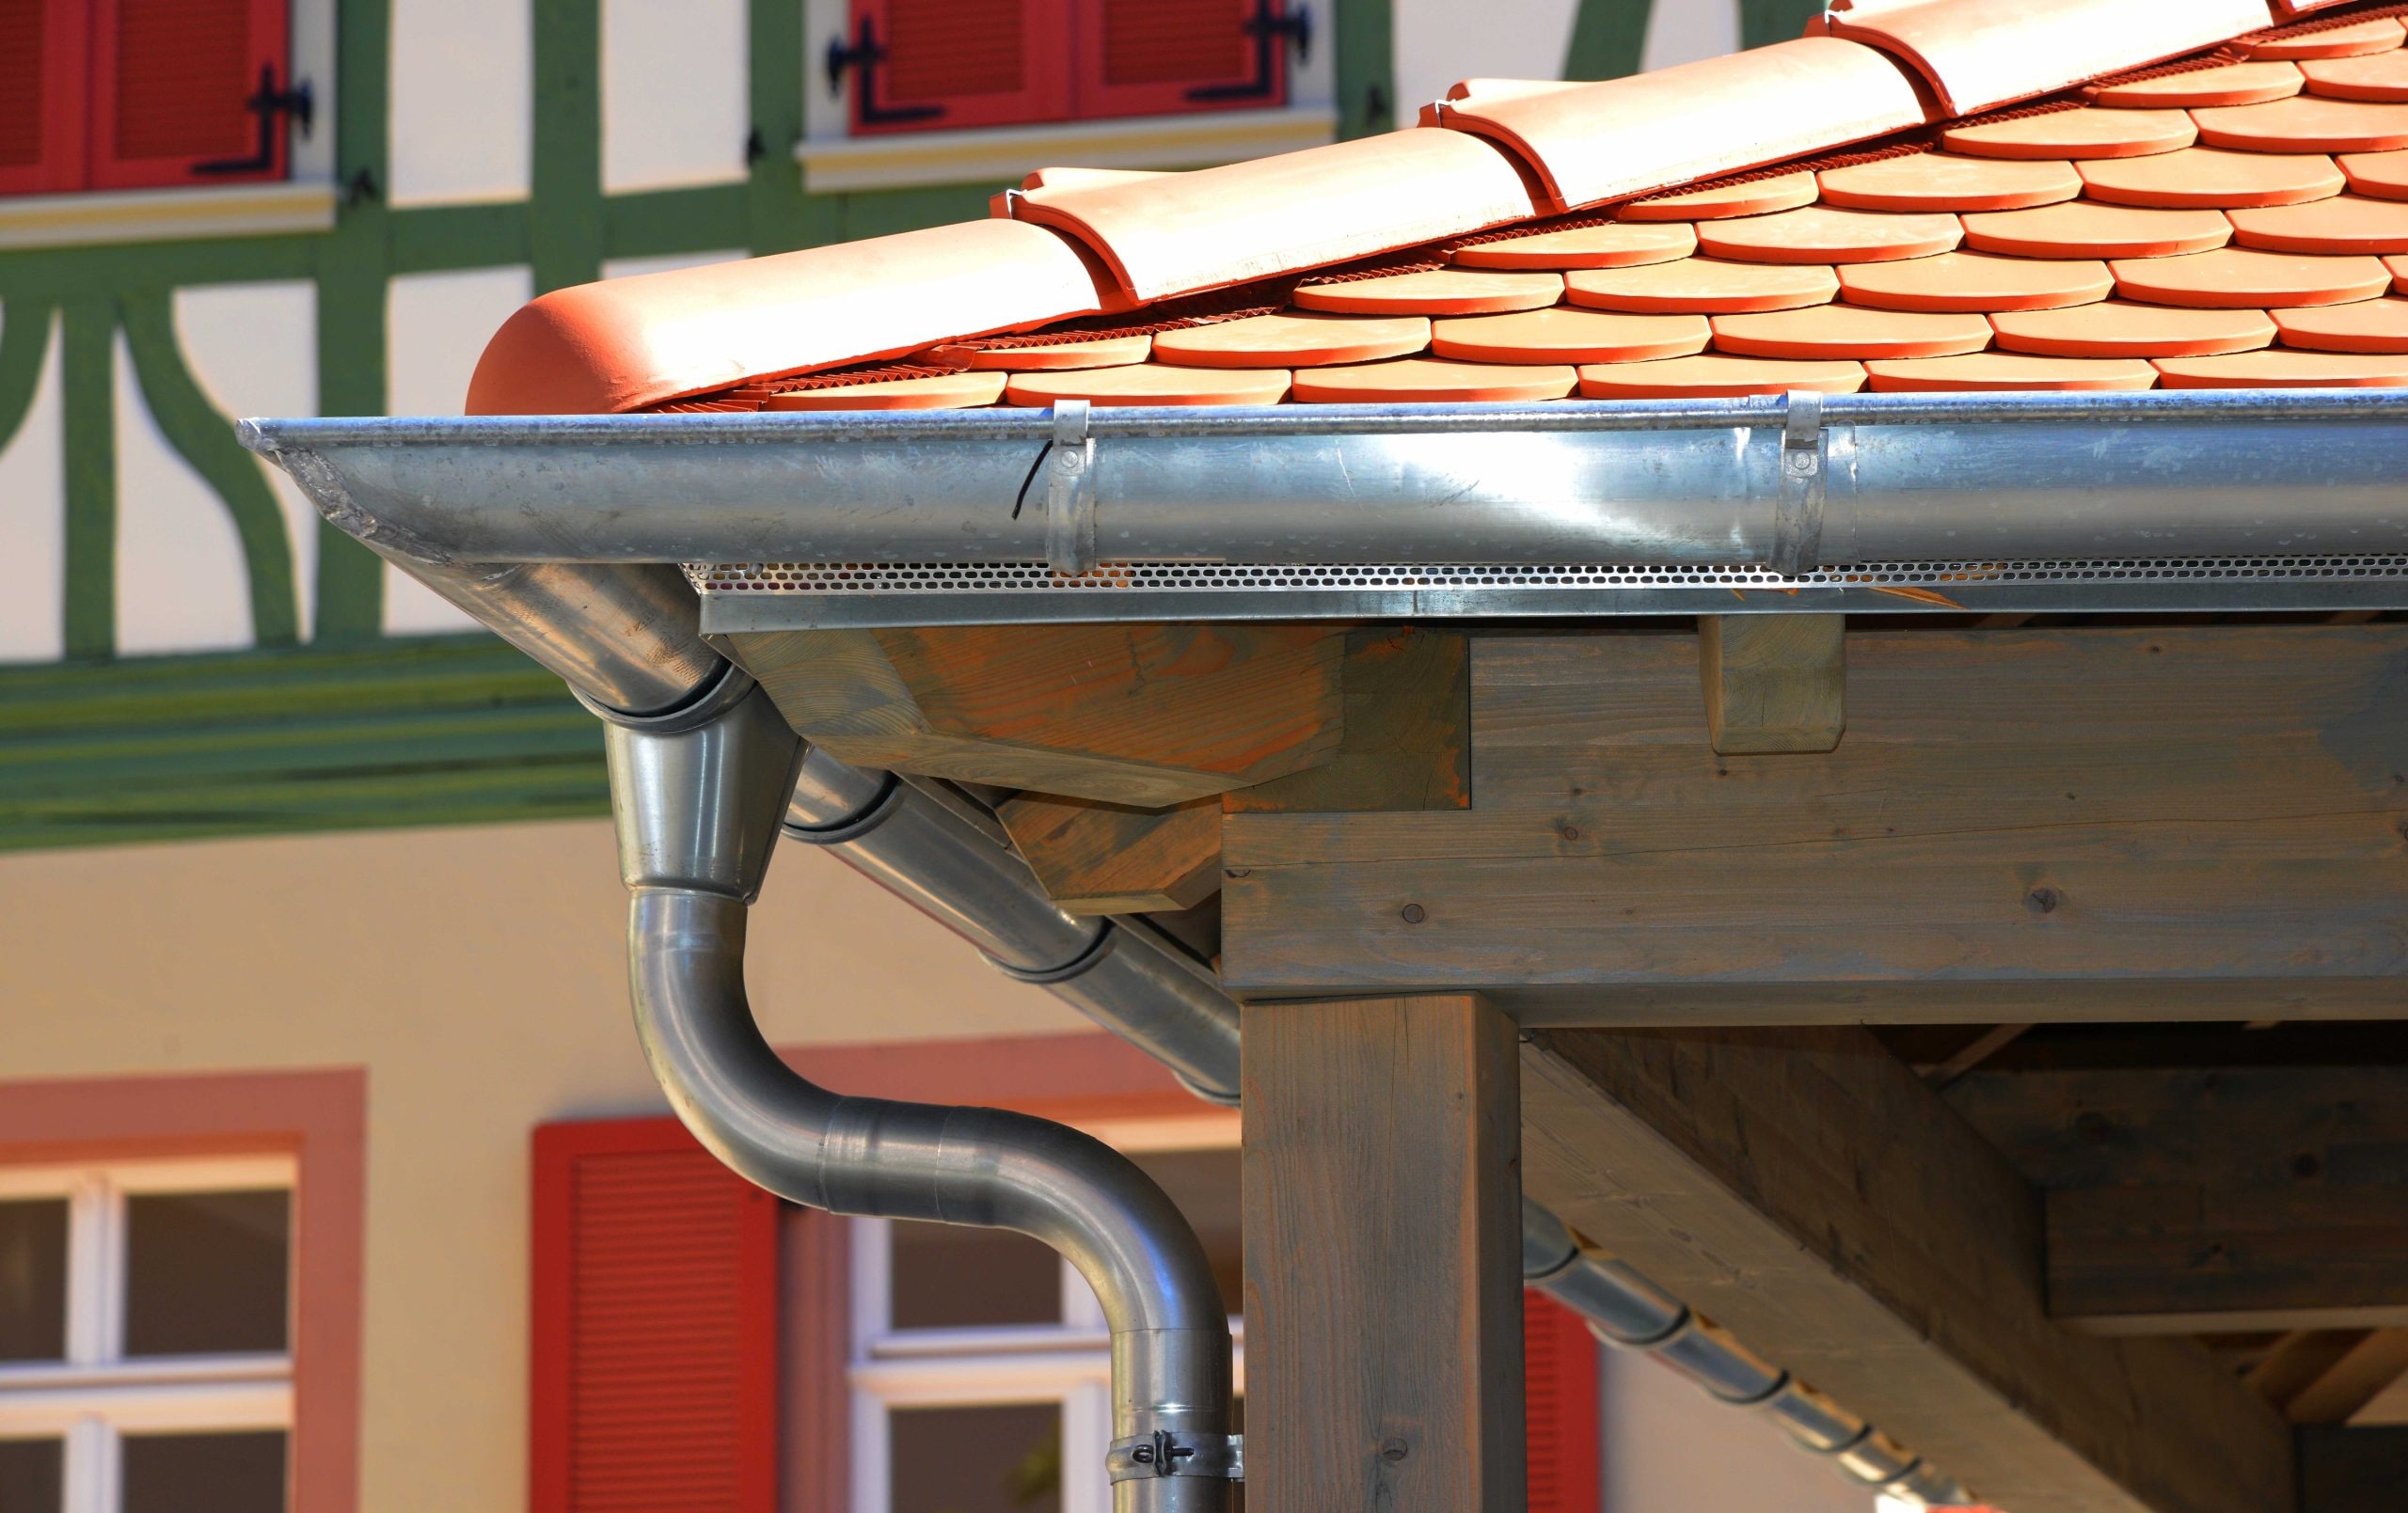 Image of a strong and durable Steel Gutter system, installed on a commercial building's roof. The Steel material is resistant to impact, weathering, and fire, making it ideal for high-traffic and high-risk areas.